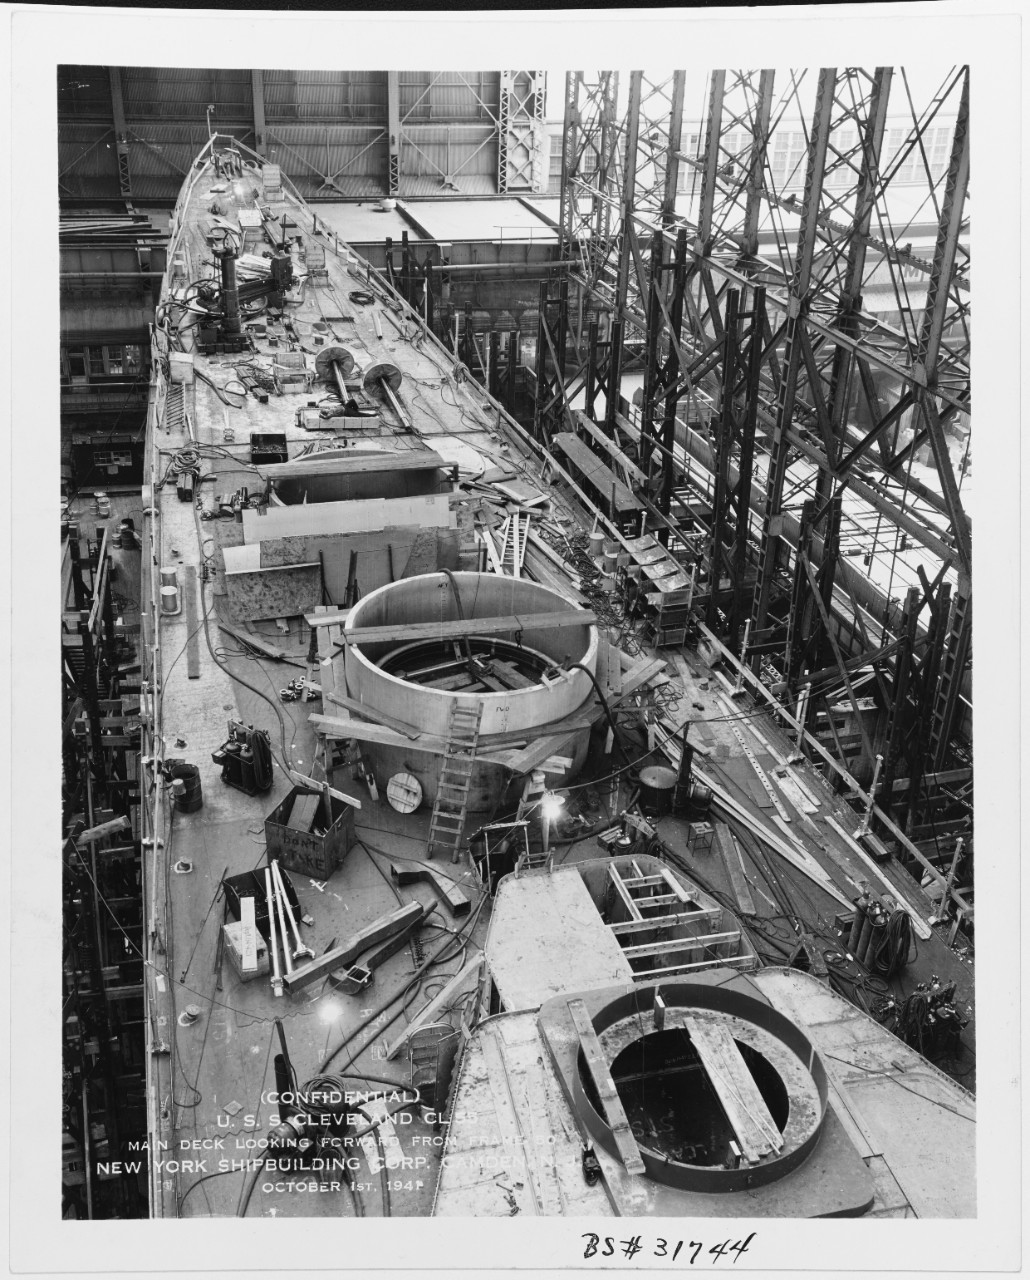 Photo #: 19-N-31744  USS Cleveland (CL-55)